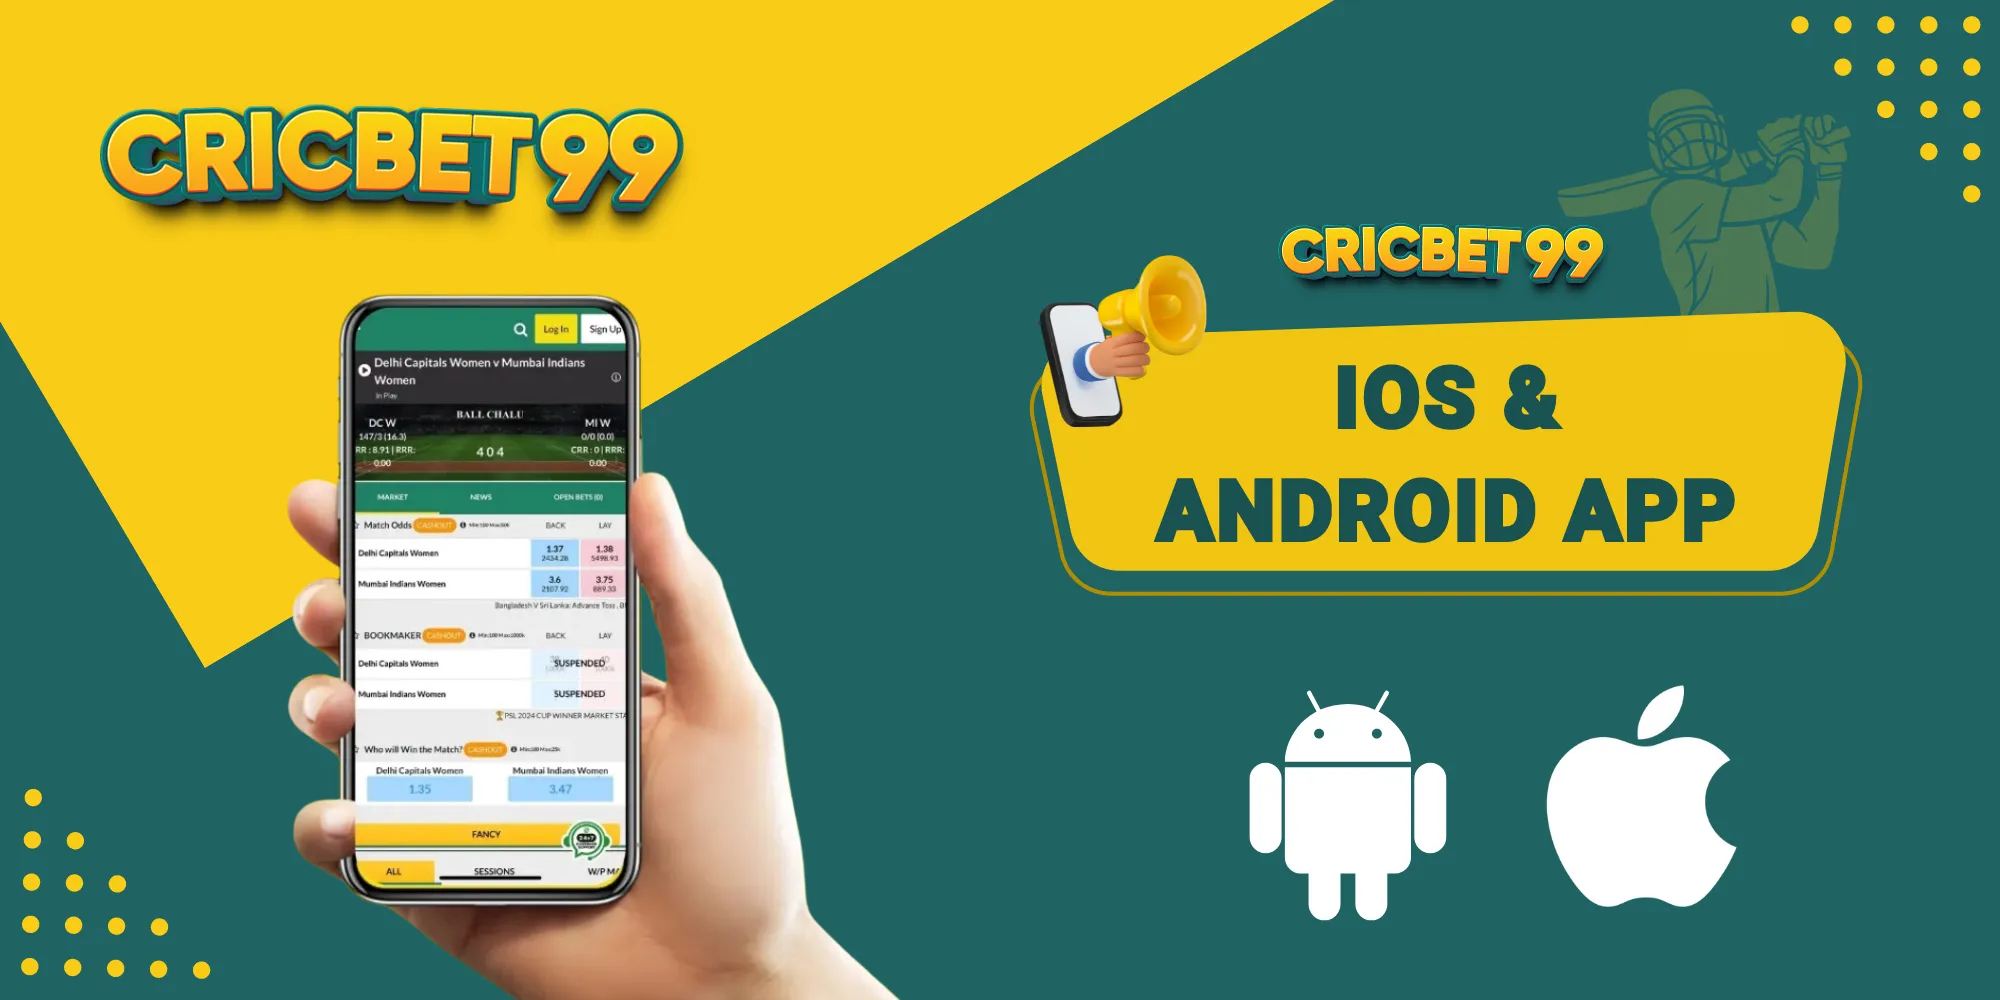 ios and android app cricbet99